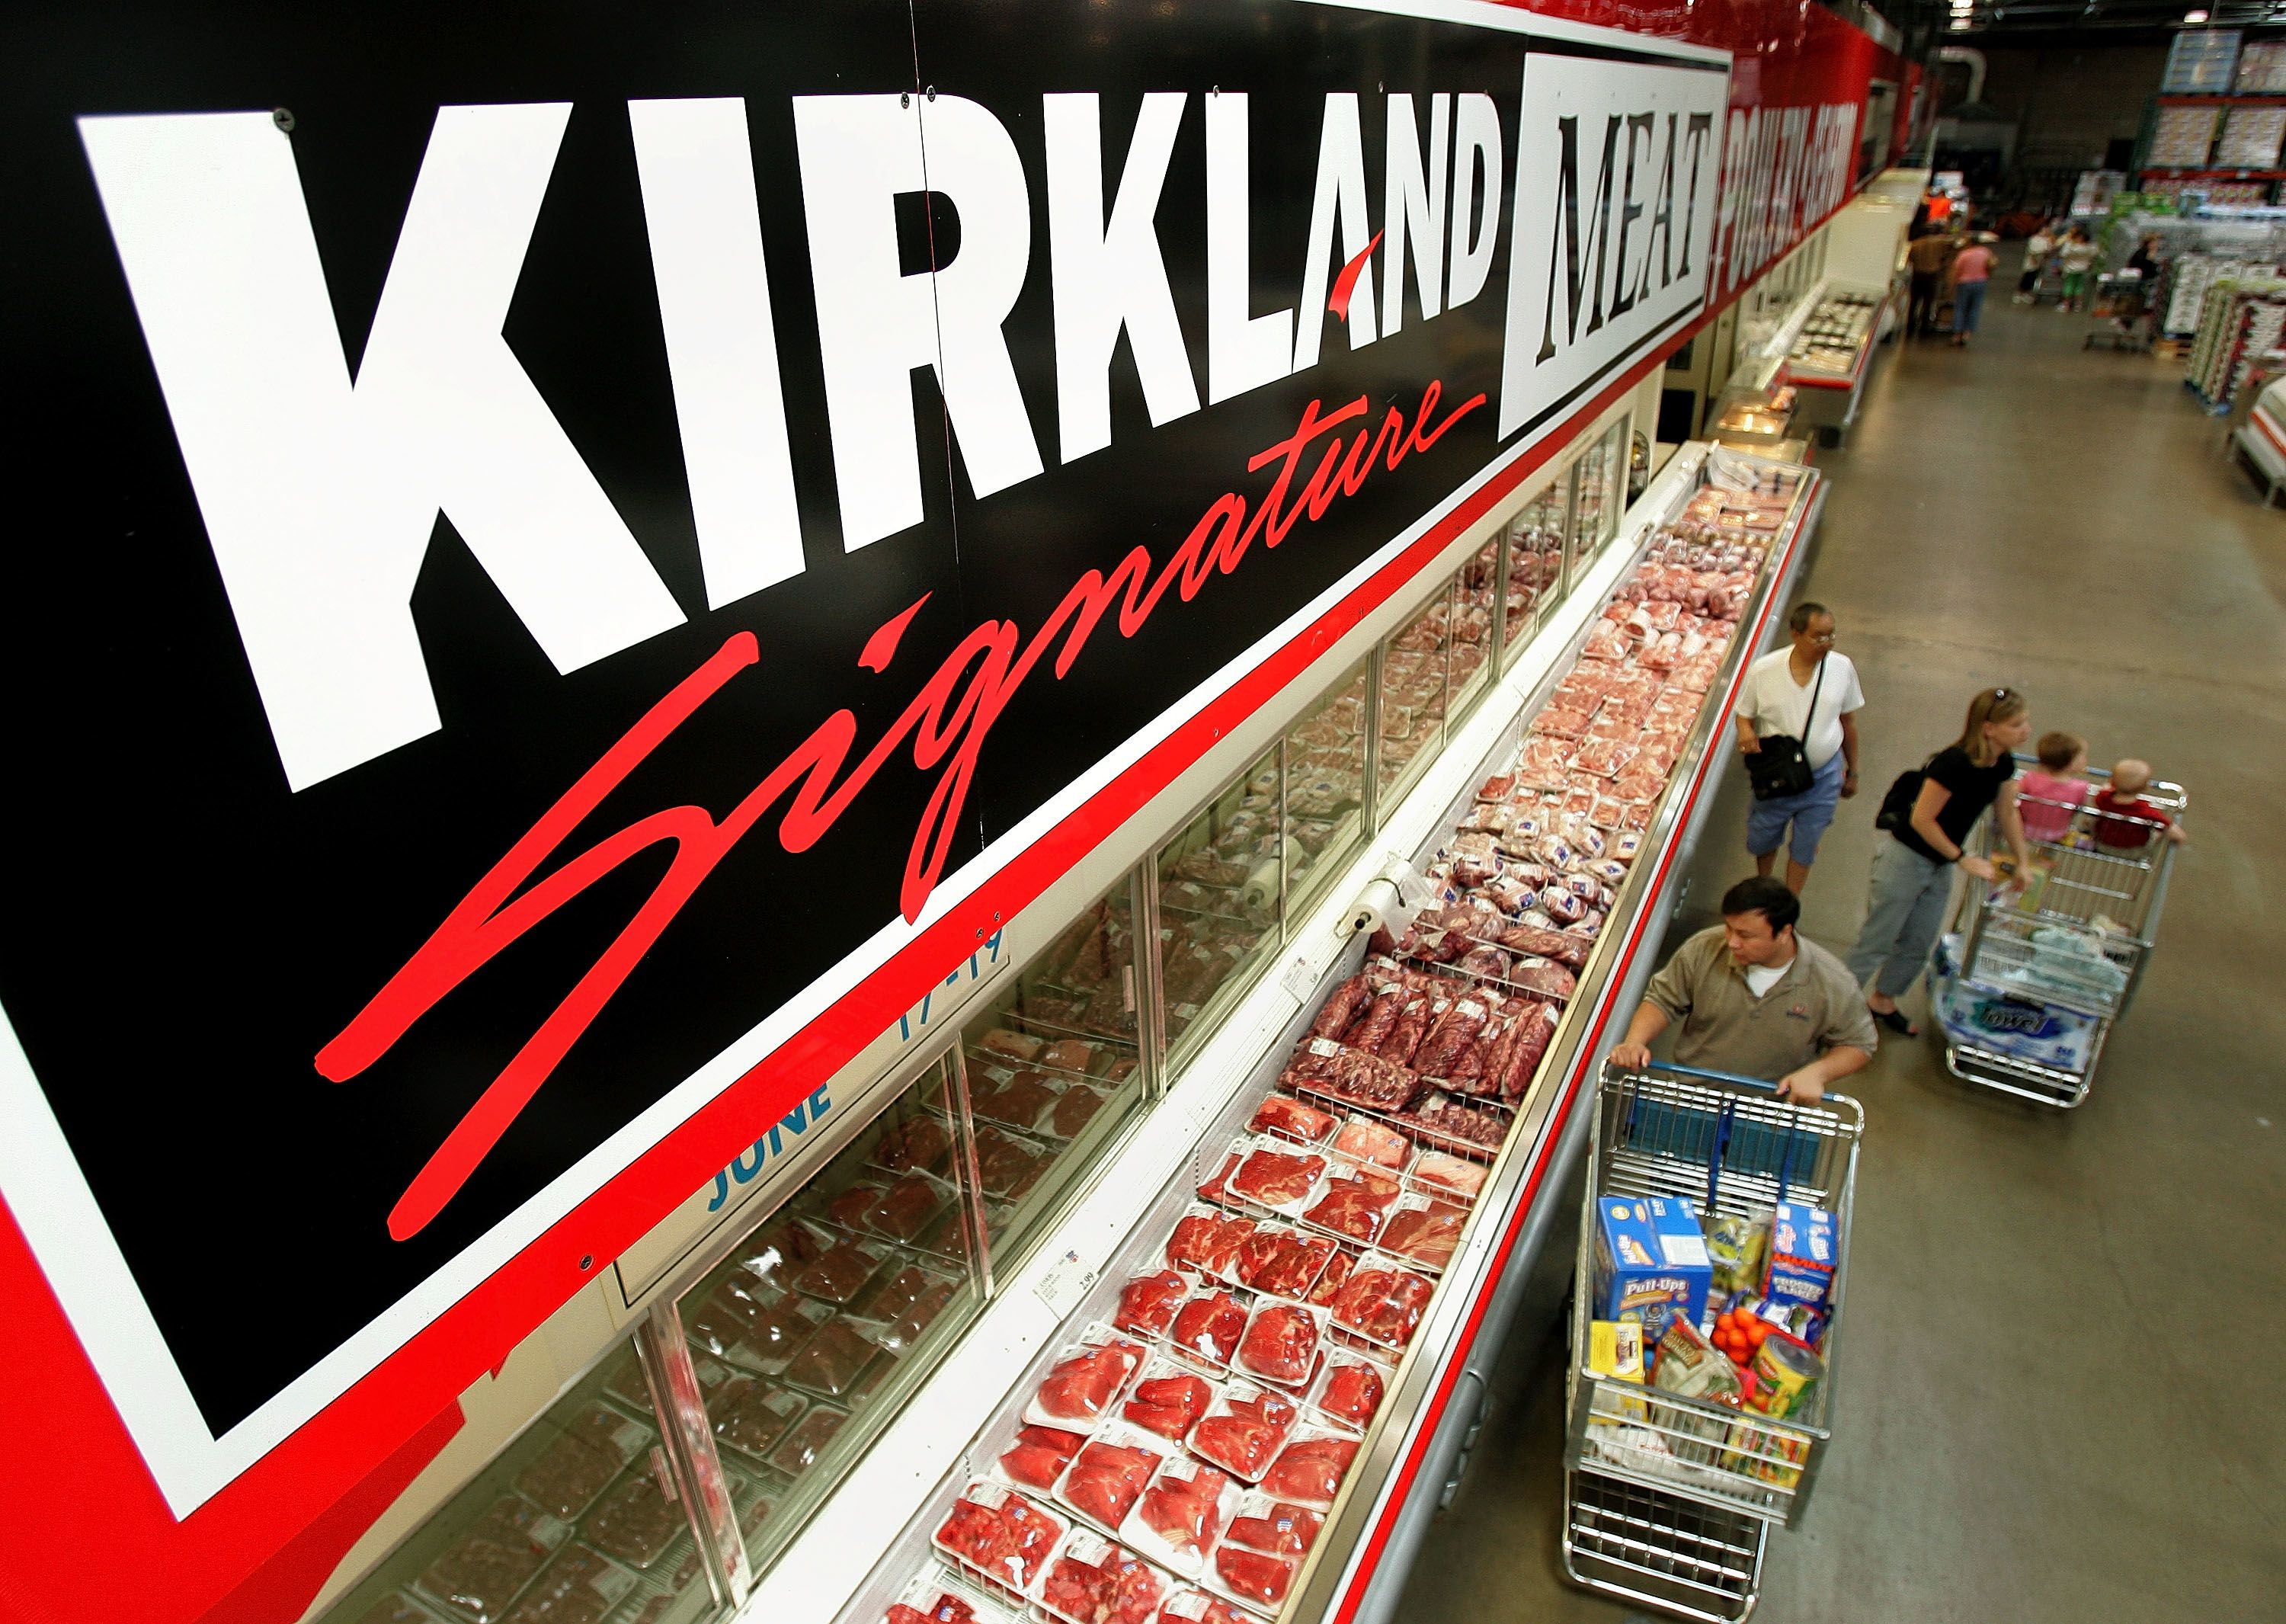 12 Best Kirkland Signature Groceries of 2023 — What to Buy at Costco